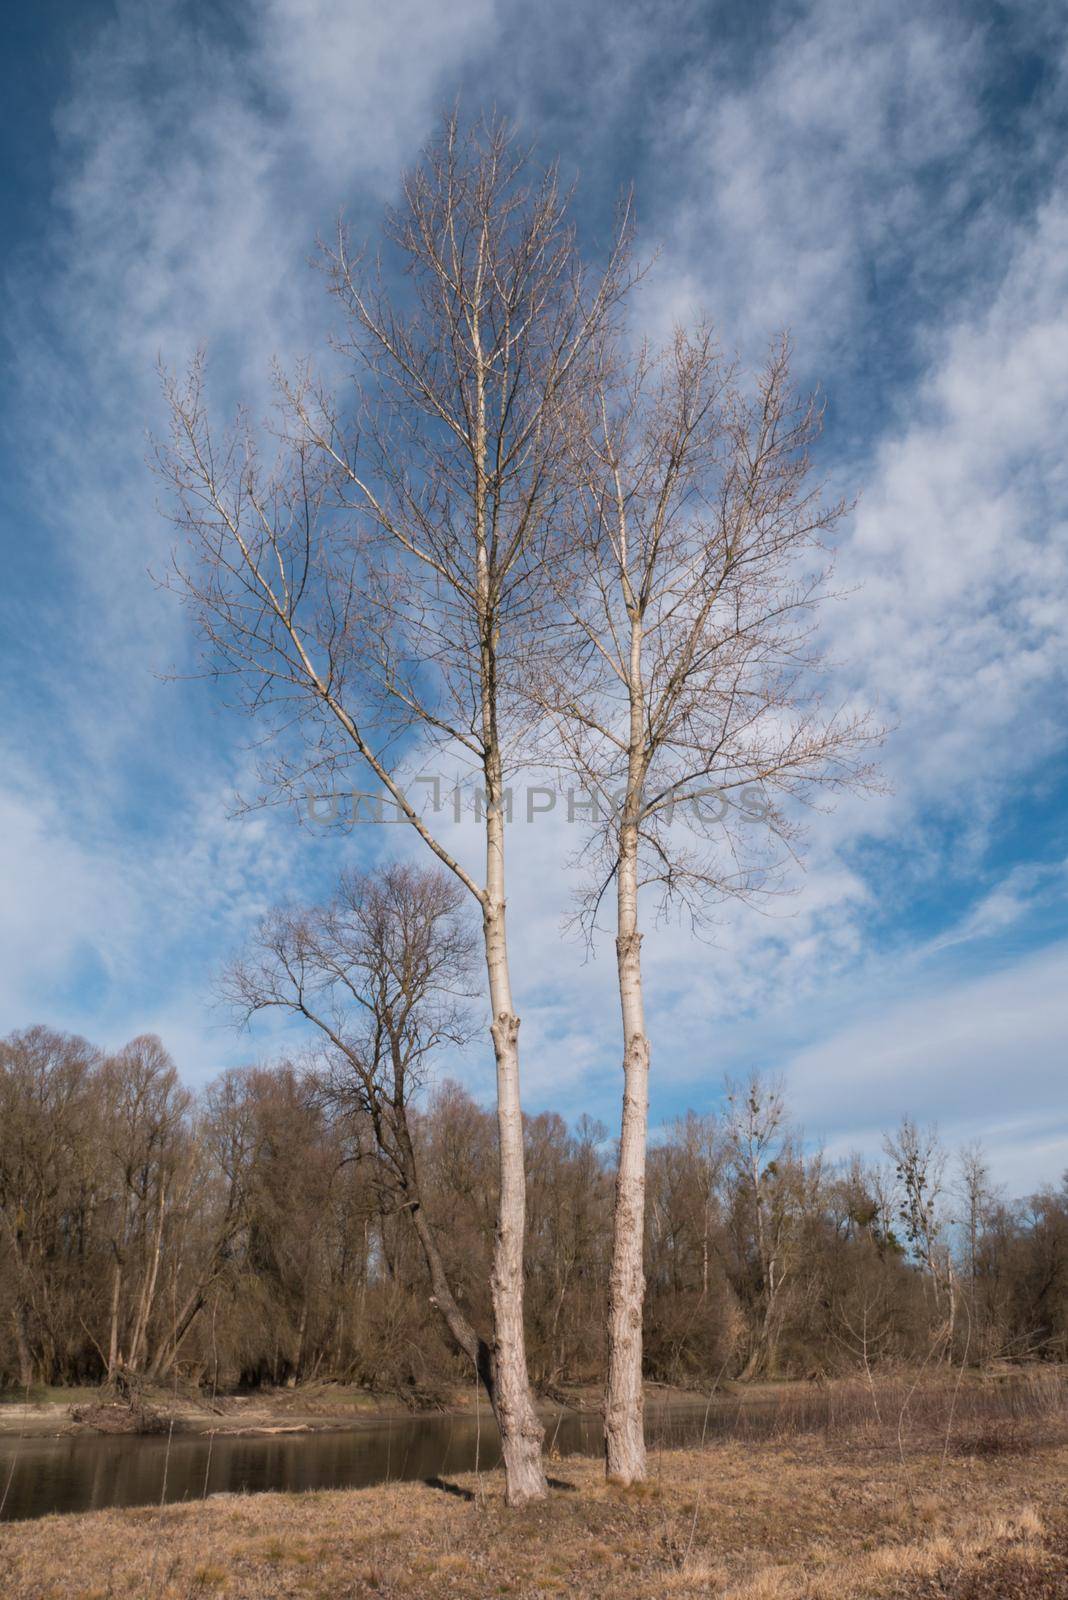 Alone tree against blue sky. Landscape scene of a one tree with blue sky and whites clouds. Sunny winter landscape scene.